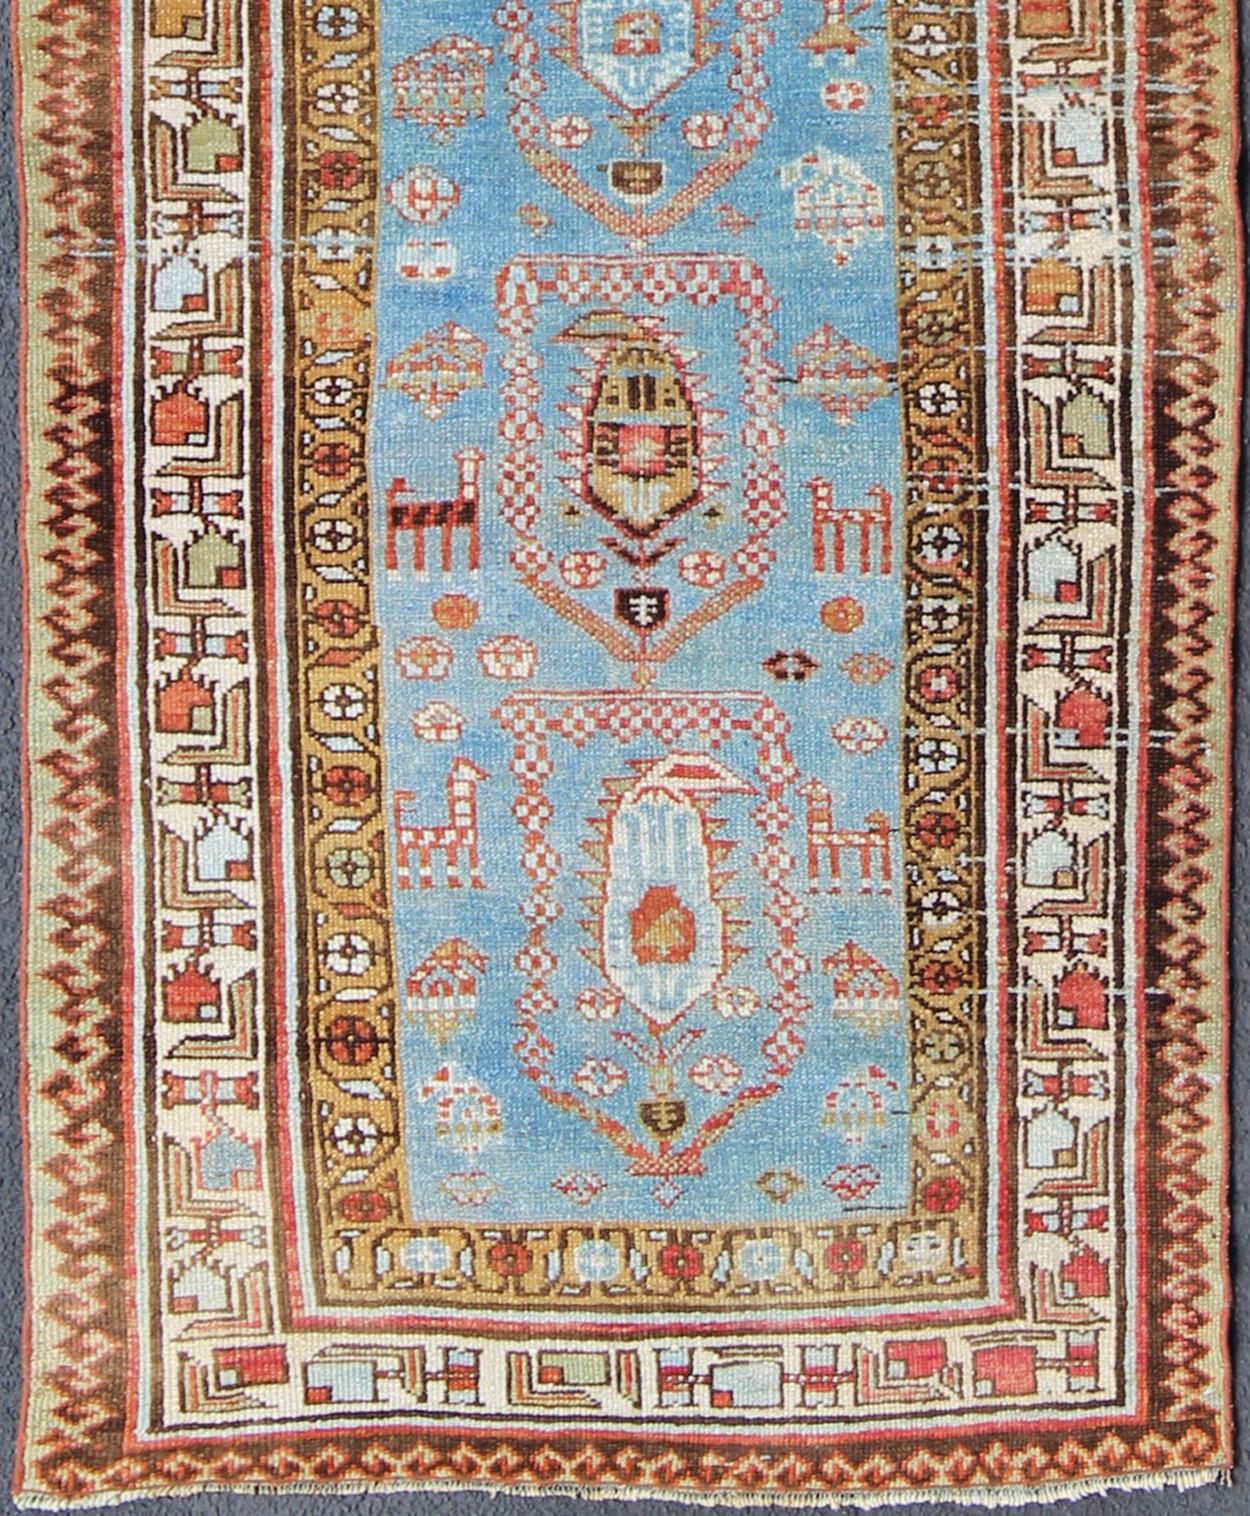 Uniquely colored Persian Kurdish antique Runner with expansive tribal design, rug ema-7565, country of origin / type: Iran / Kurdish, circa 1900.

This antique Kurdish tribal rug was woven by Kurdish weavers in western Persia. Often they used this